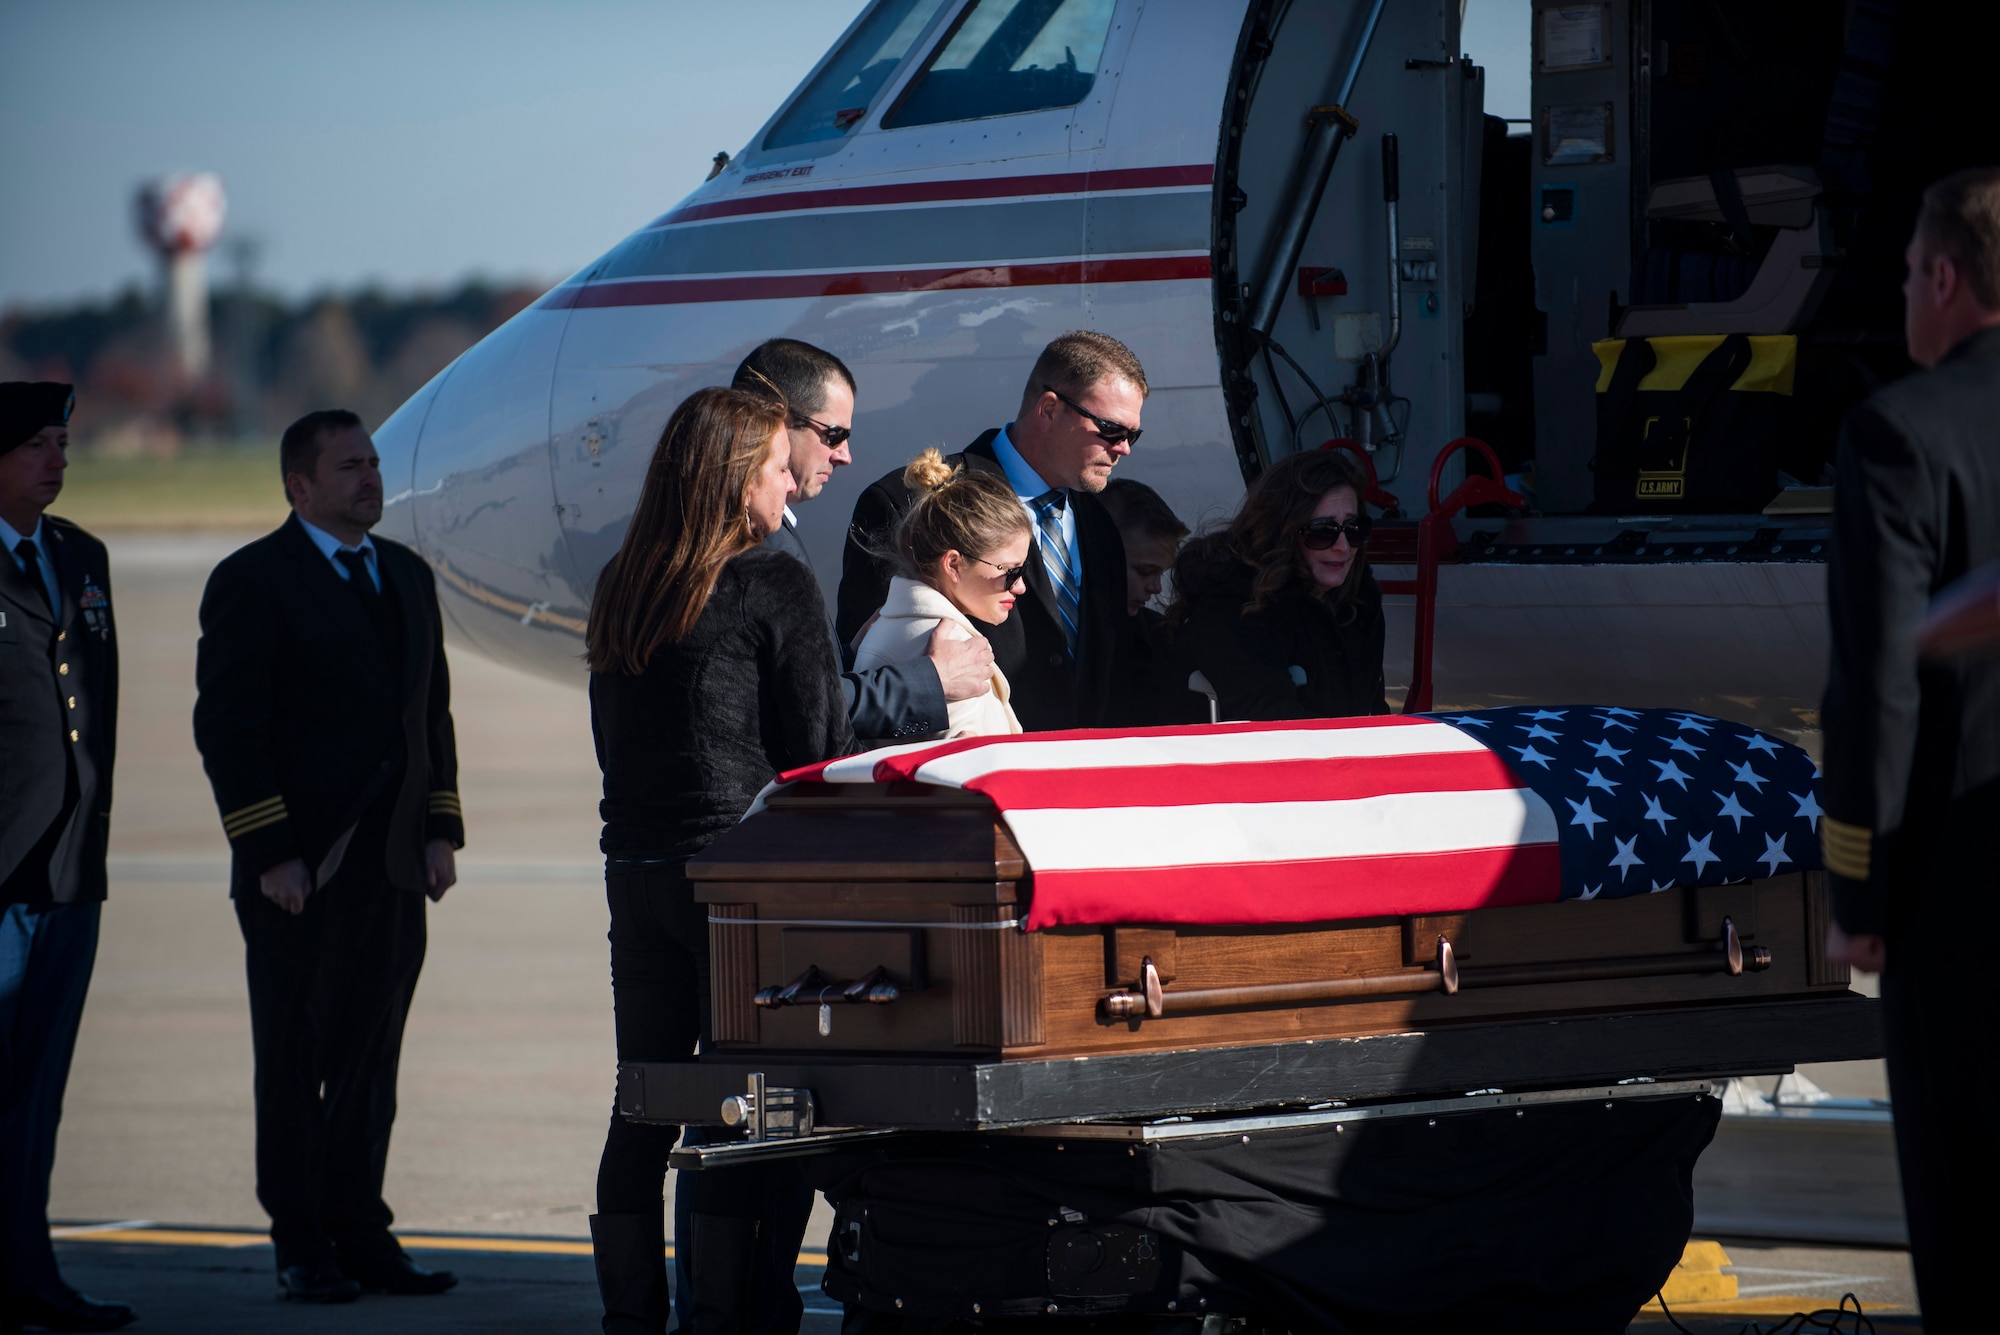 The family of Pfc. Tyler Iubelt react to seeing his coffin during a dignified transfer ceremony 21 Nov., 2016, at Scott Air Force Base, Illinois. Iubelt passed away on 12 Nov. while deployed to Bagram, Afghanistan. (U.S. Air Force photo by Staff Sgt. Clayton Lenhardt)